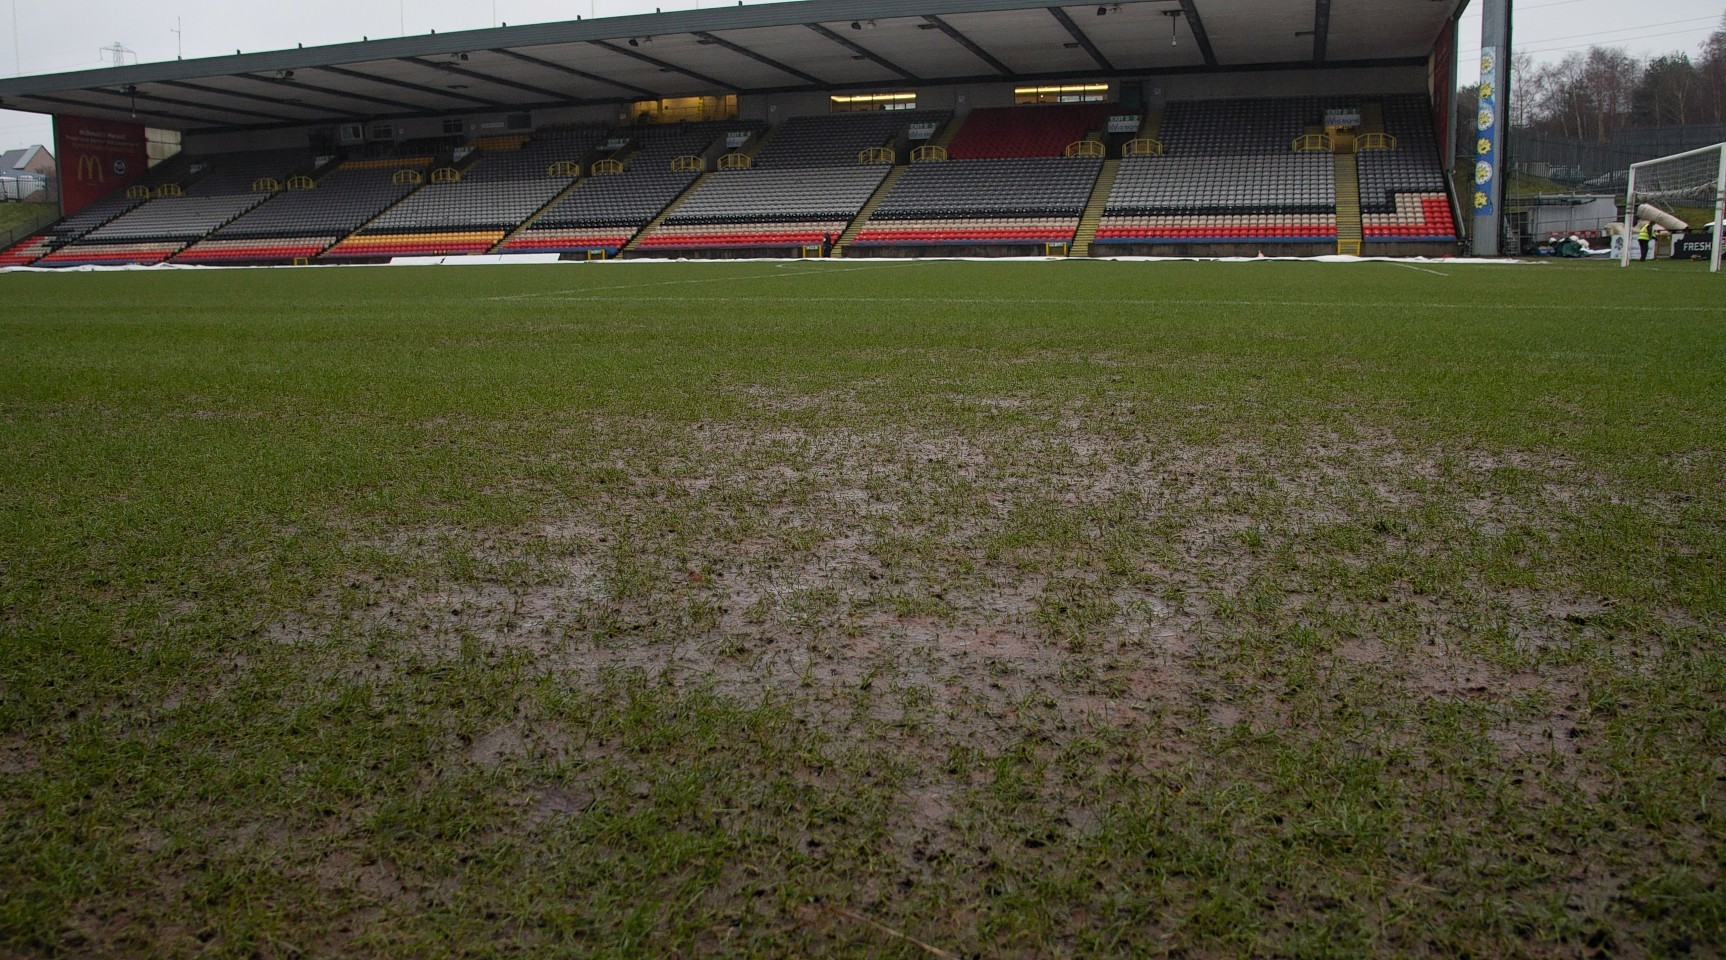 The pitch could not deal with the heavy downpours